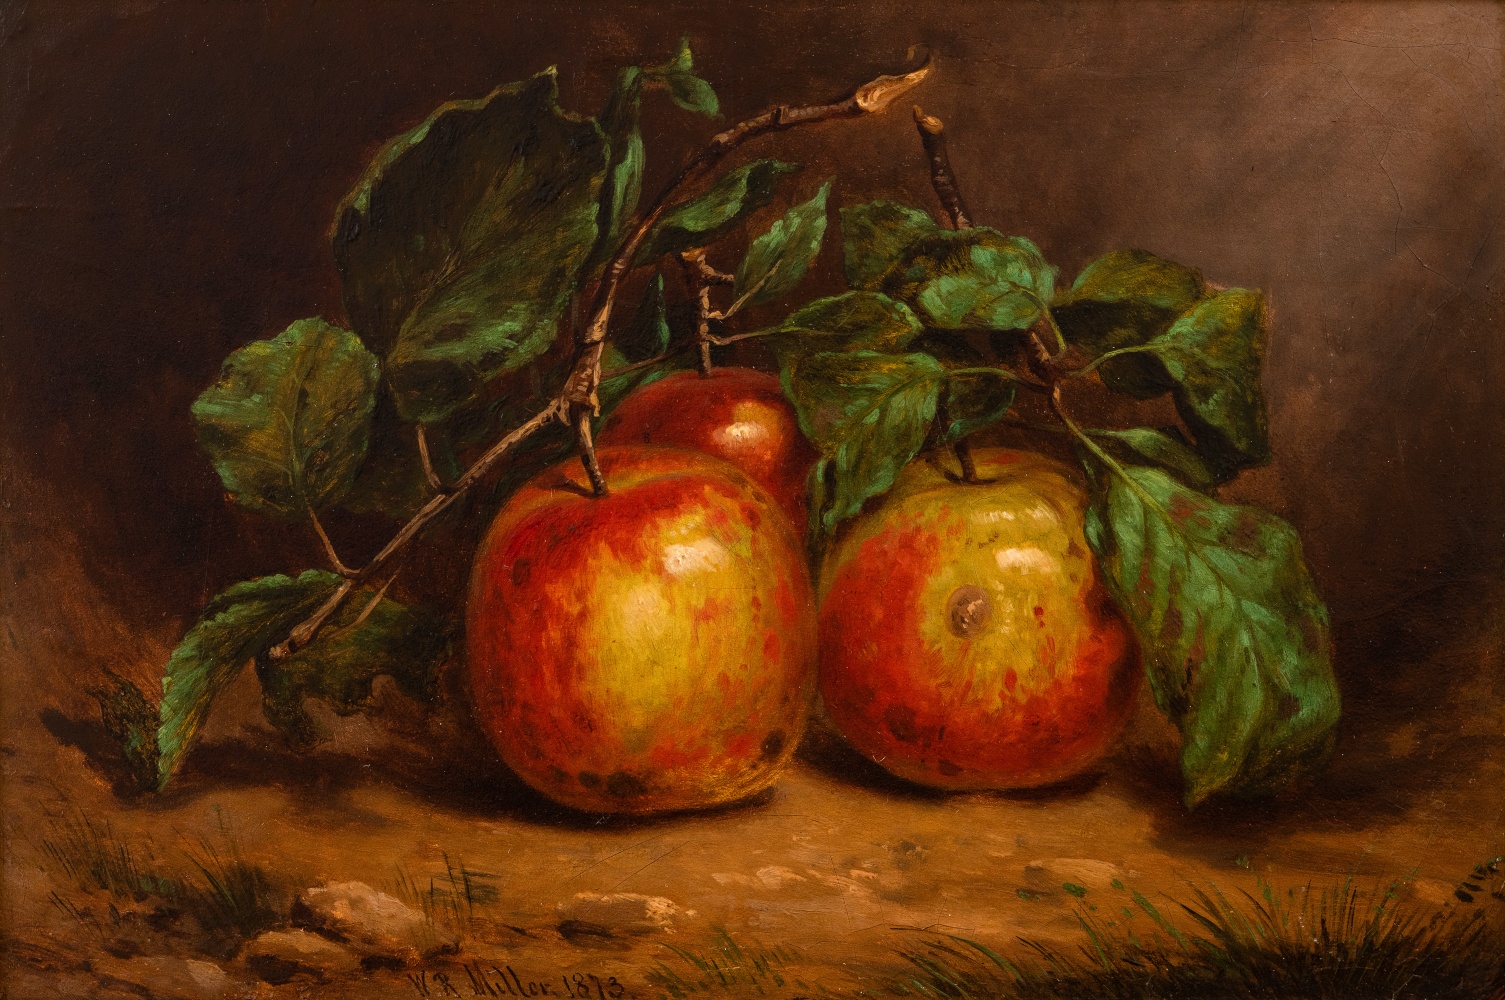 William Rickarby Miller (1816–1888), Study of Apples on a Bough, 1873, oil on board, 8 1/2 x 12 1/2 in. , signed and dated lower left: W. R. Miller 1873